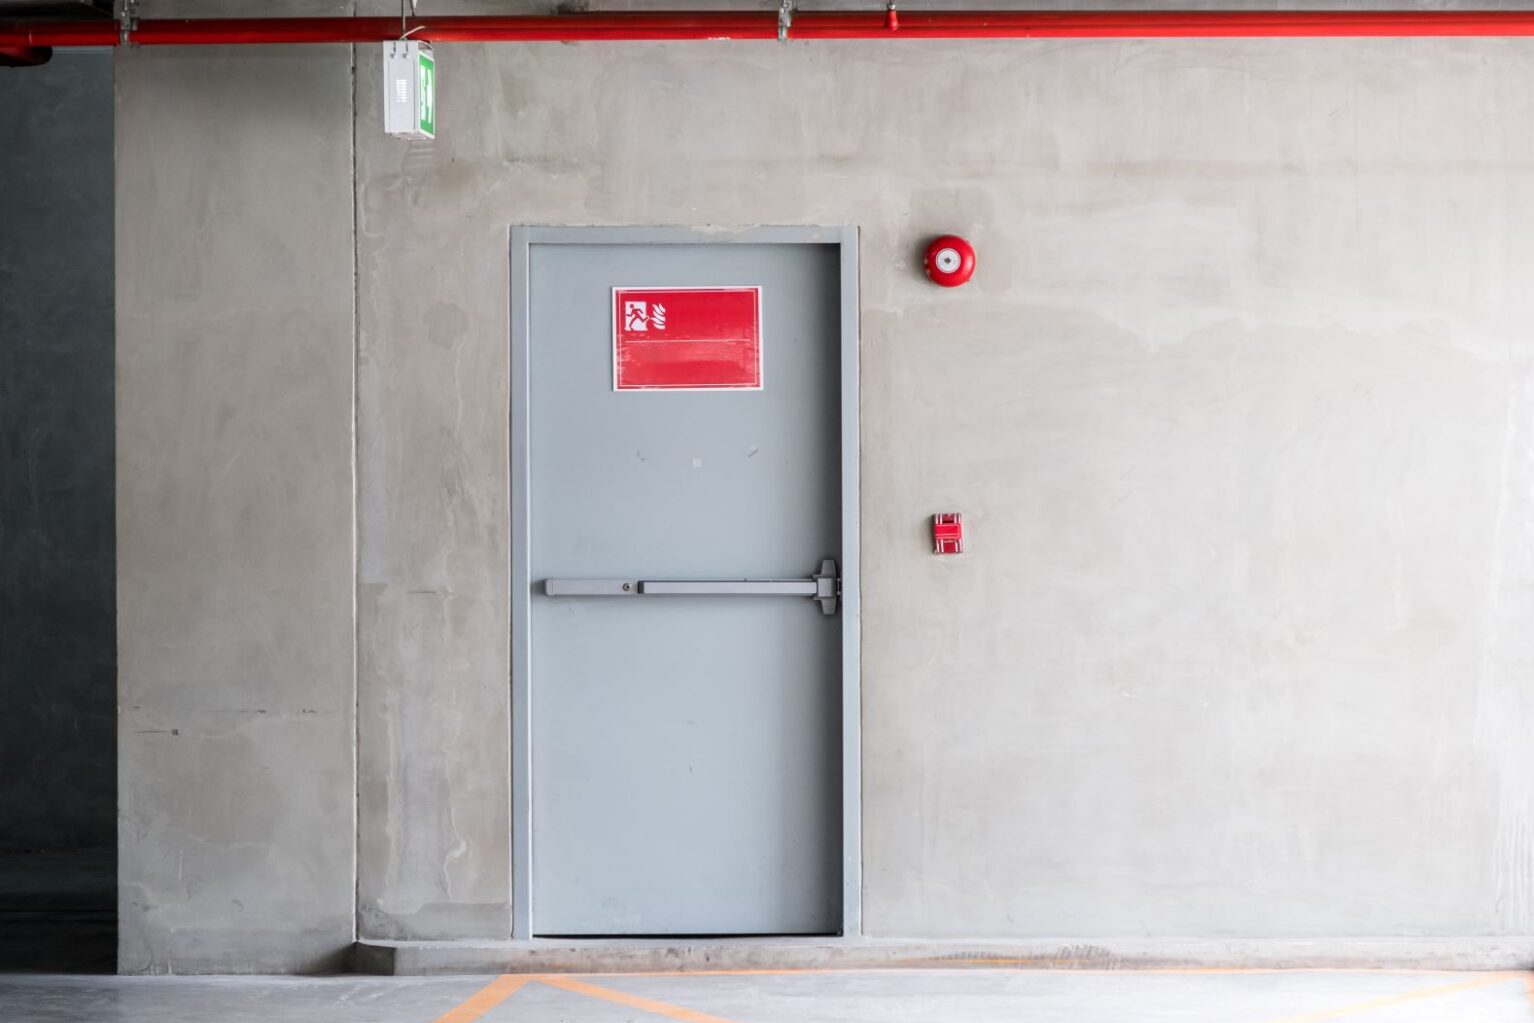 Fire doors and emergency exits